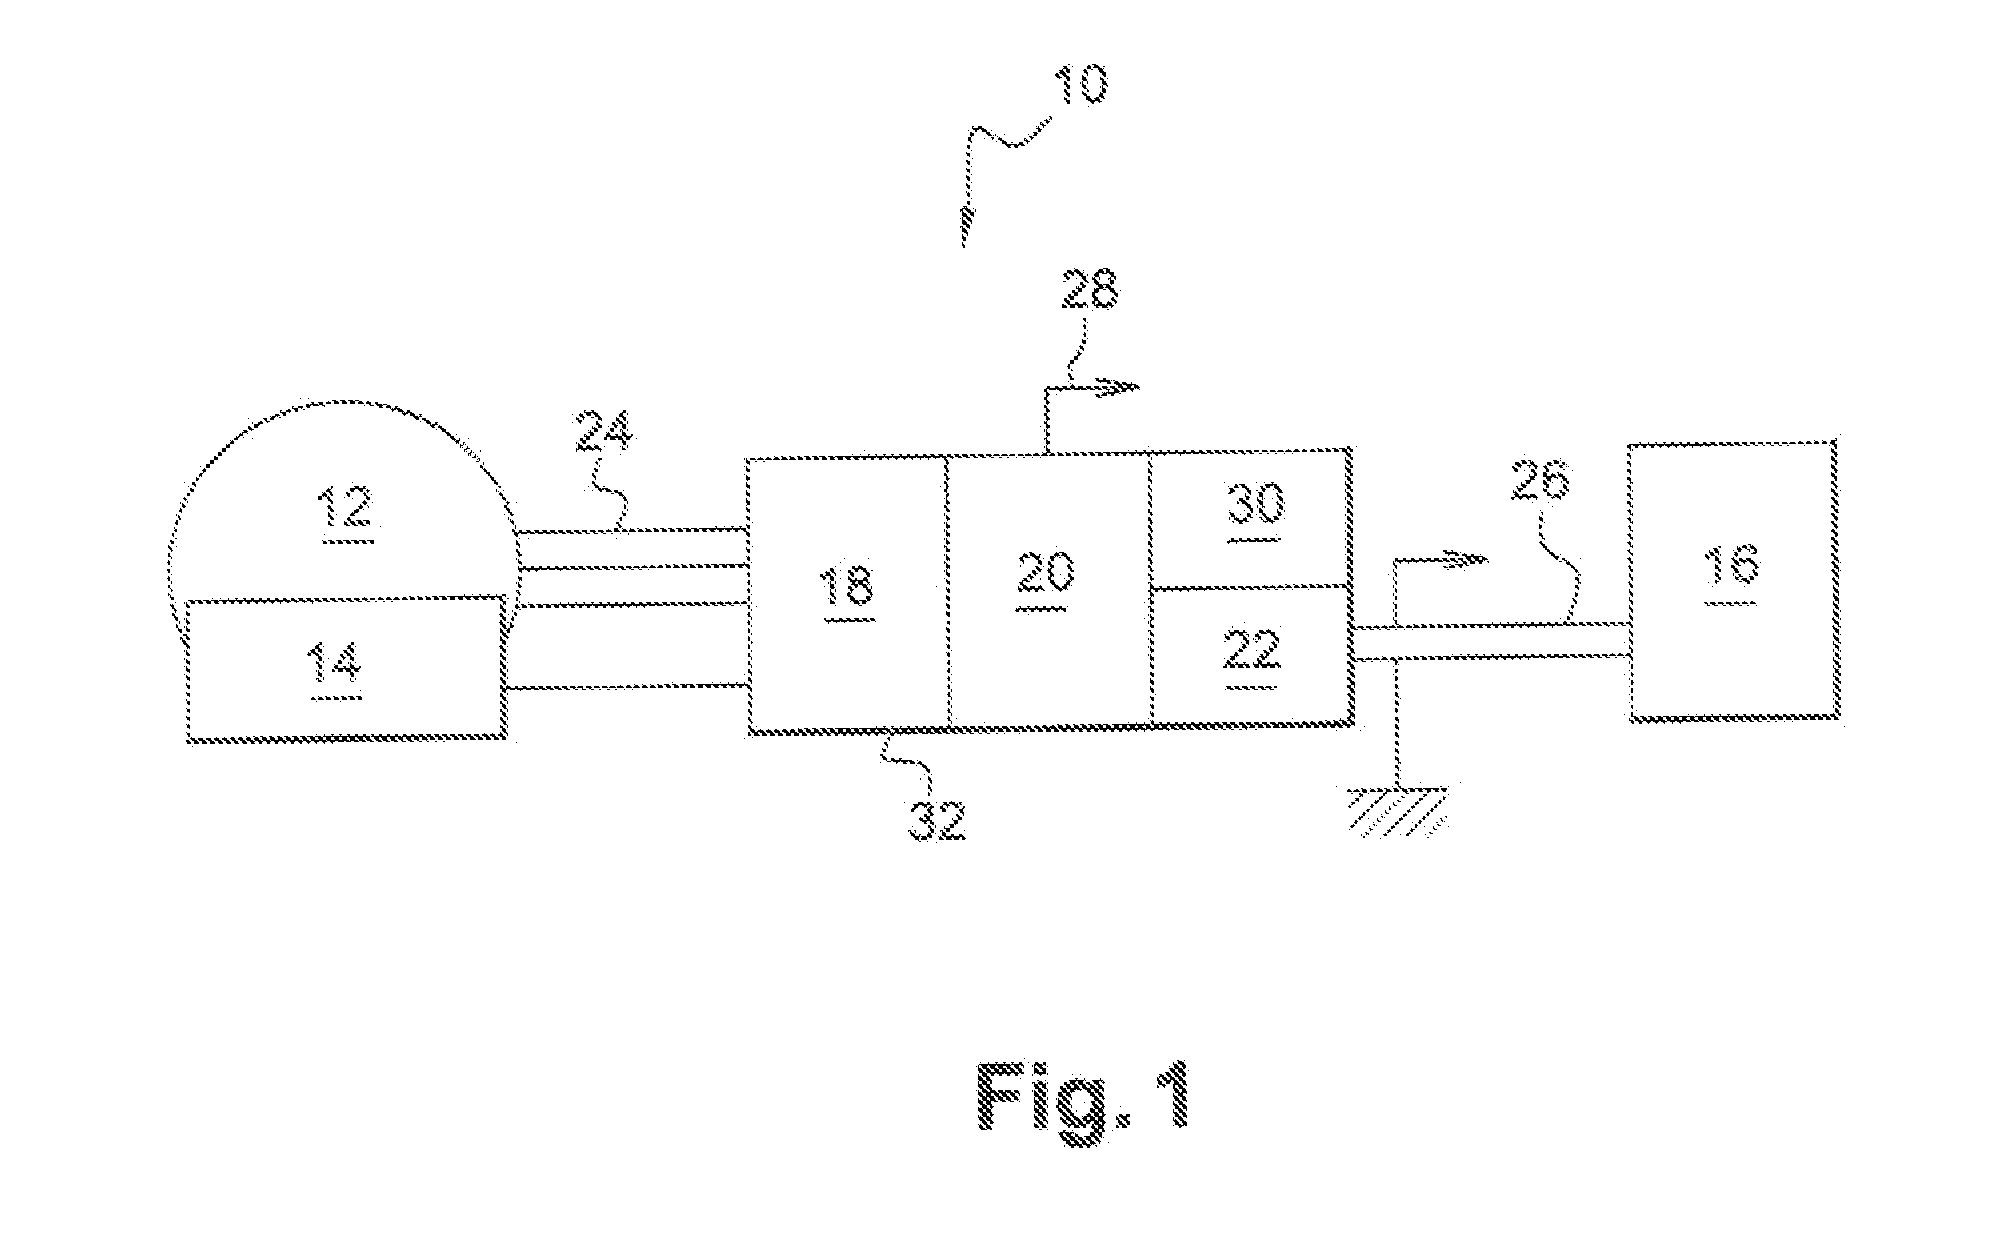 Electrical power supply device comprising a tray for accommodating ultra-high capacity storage units